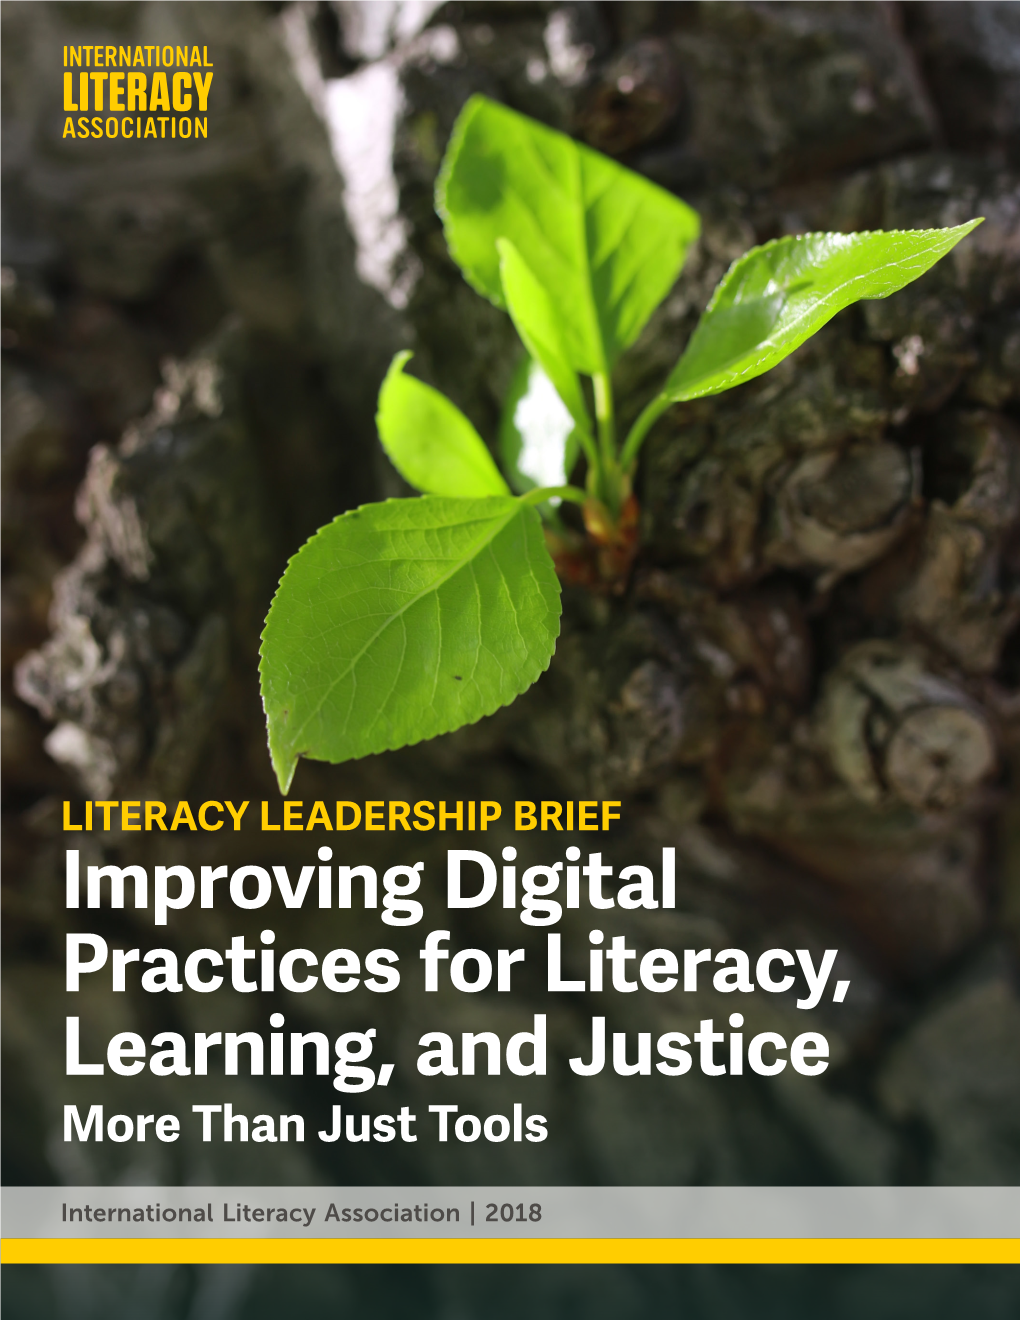 Improving Digital Practices for Literacy, Learning, and Justice More Than Just Tools